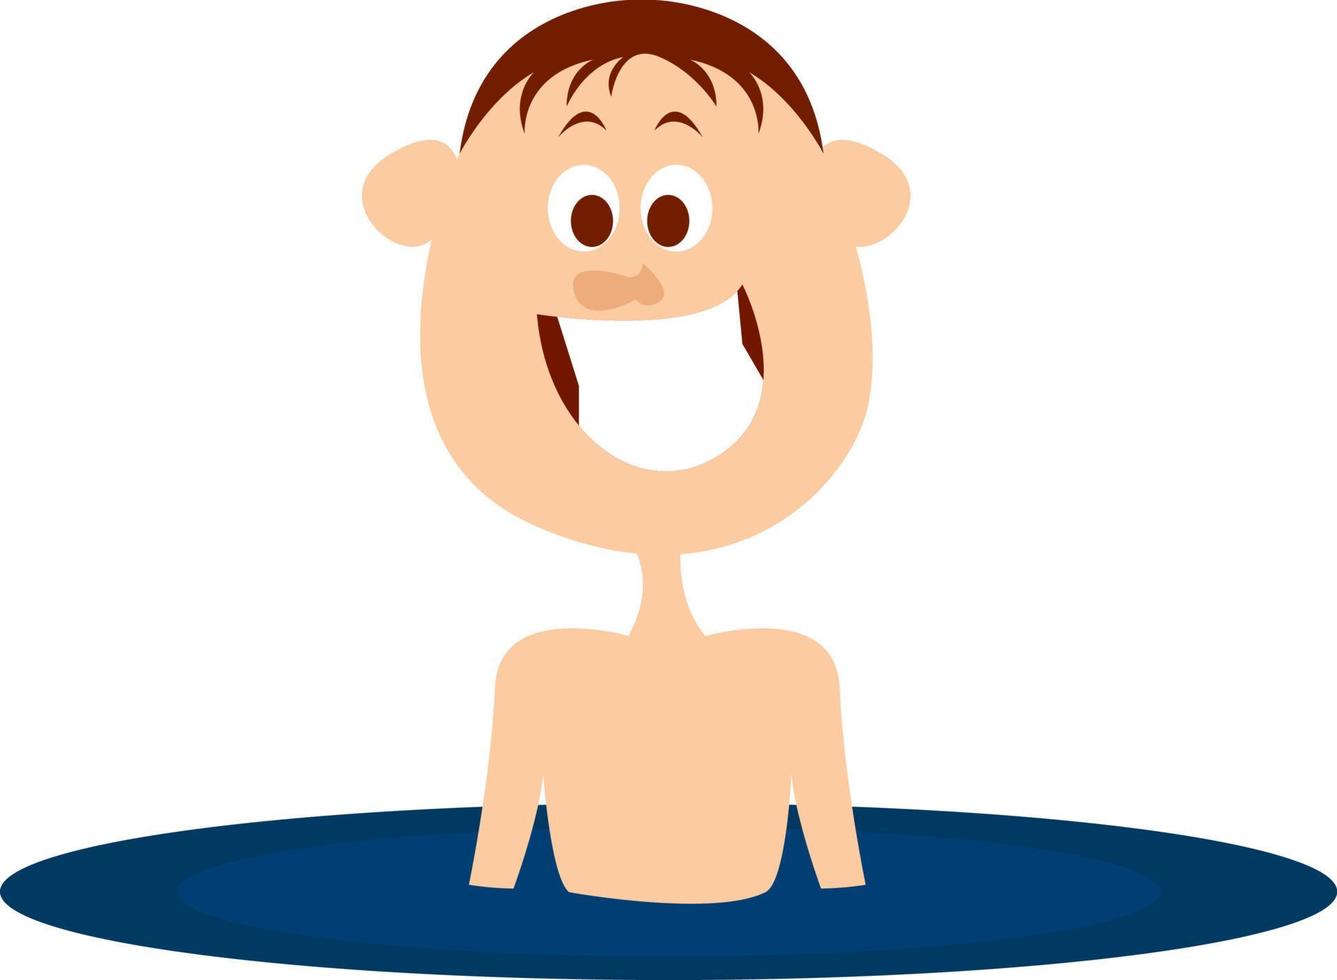 Boy in the pool, illustration, vector on white background.